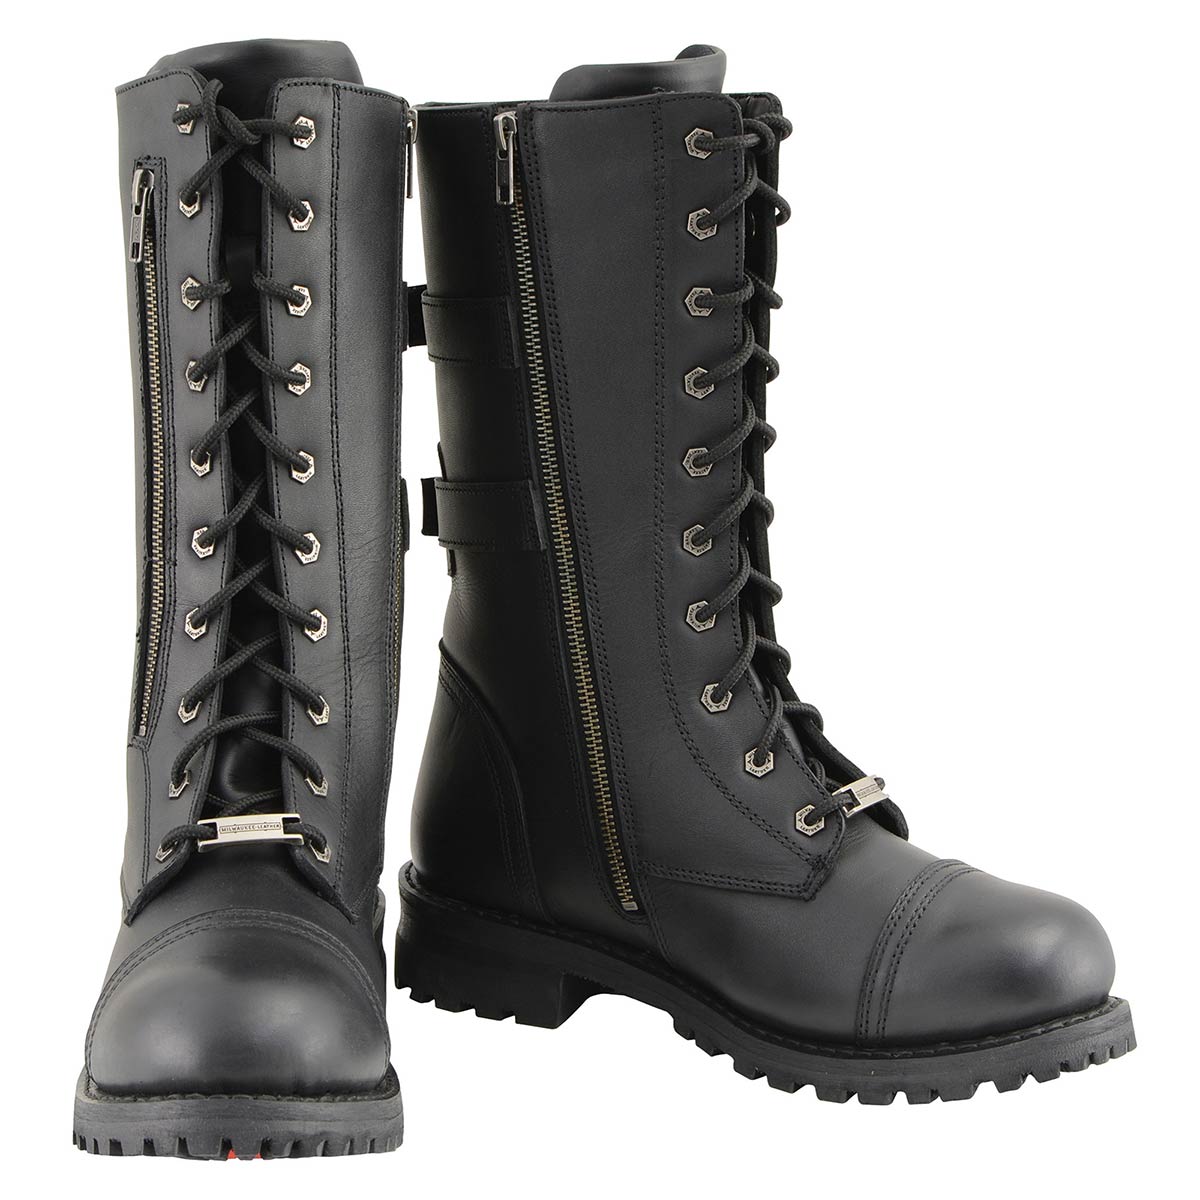 Milwaukee Leather MBM9069 Men’s Tall 'Tactical Style' Black Lace-Up Leather Boots with Buckles and Zipper Storage Pocket